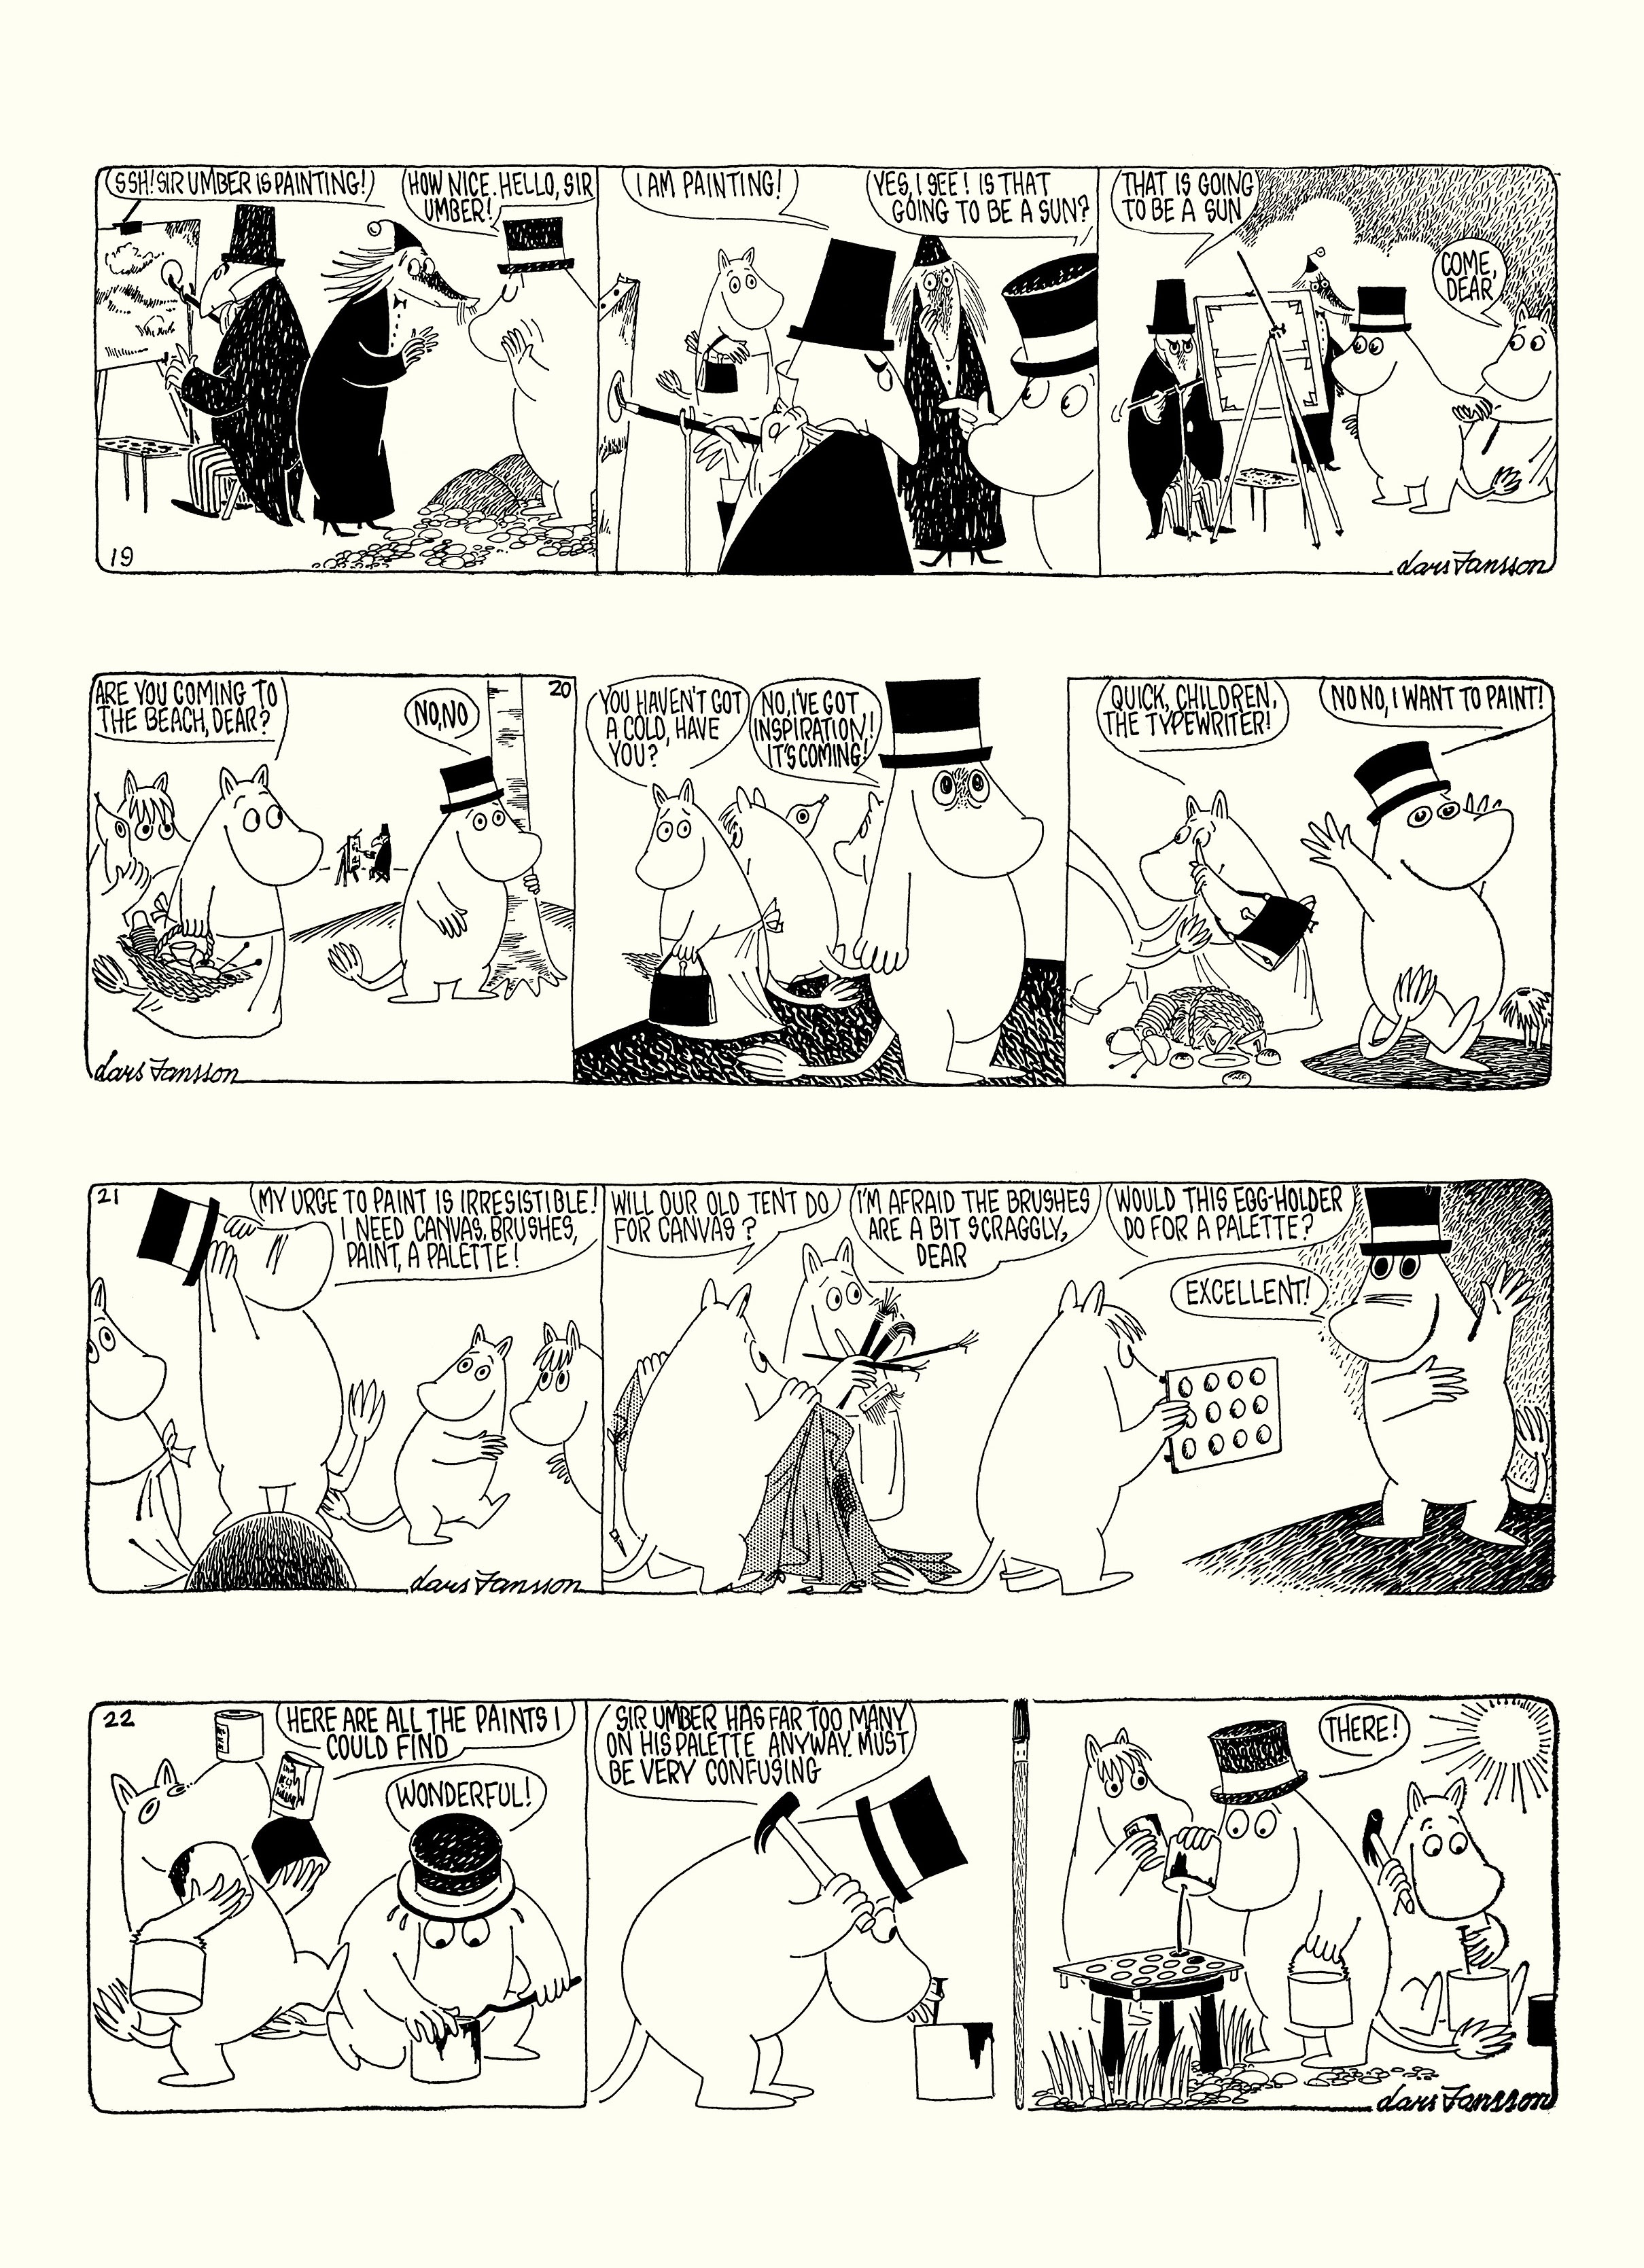 Read online Moomin: The Complete Lars Jansson Comic Strip comic -  Issue # TPB 8 - 32